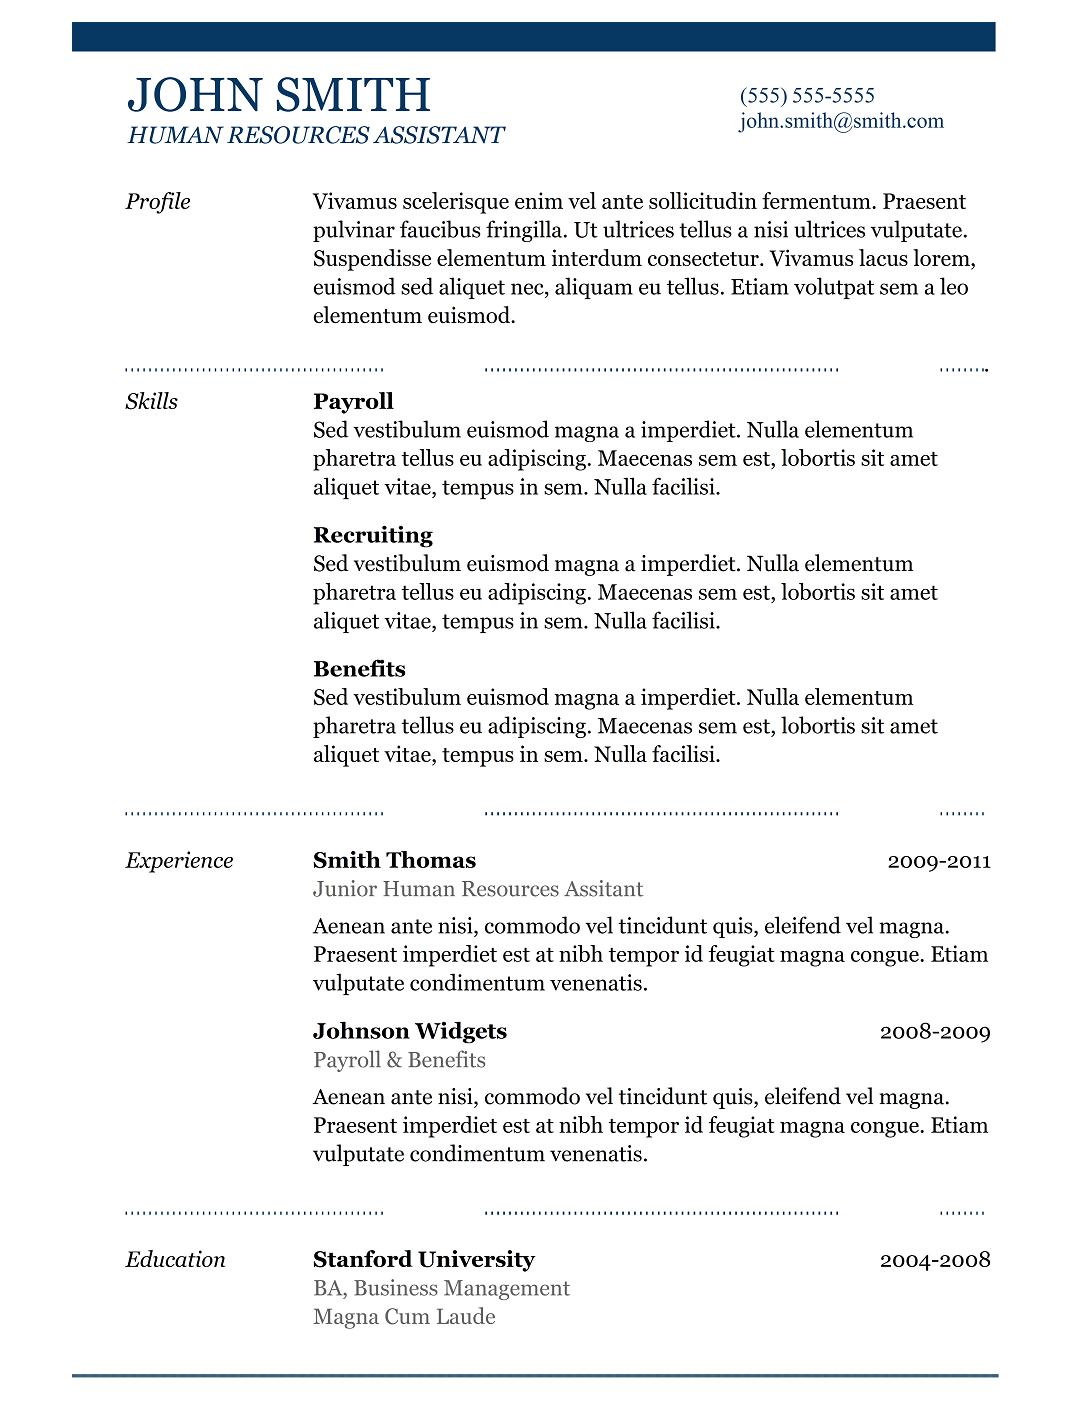 Resume samples limited education